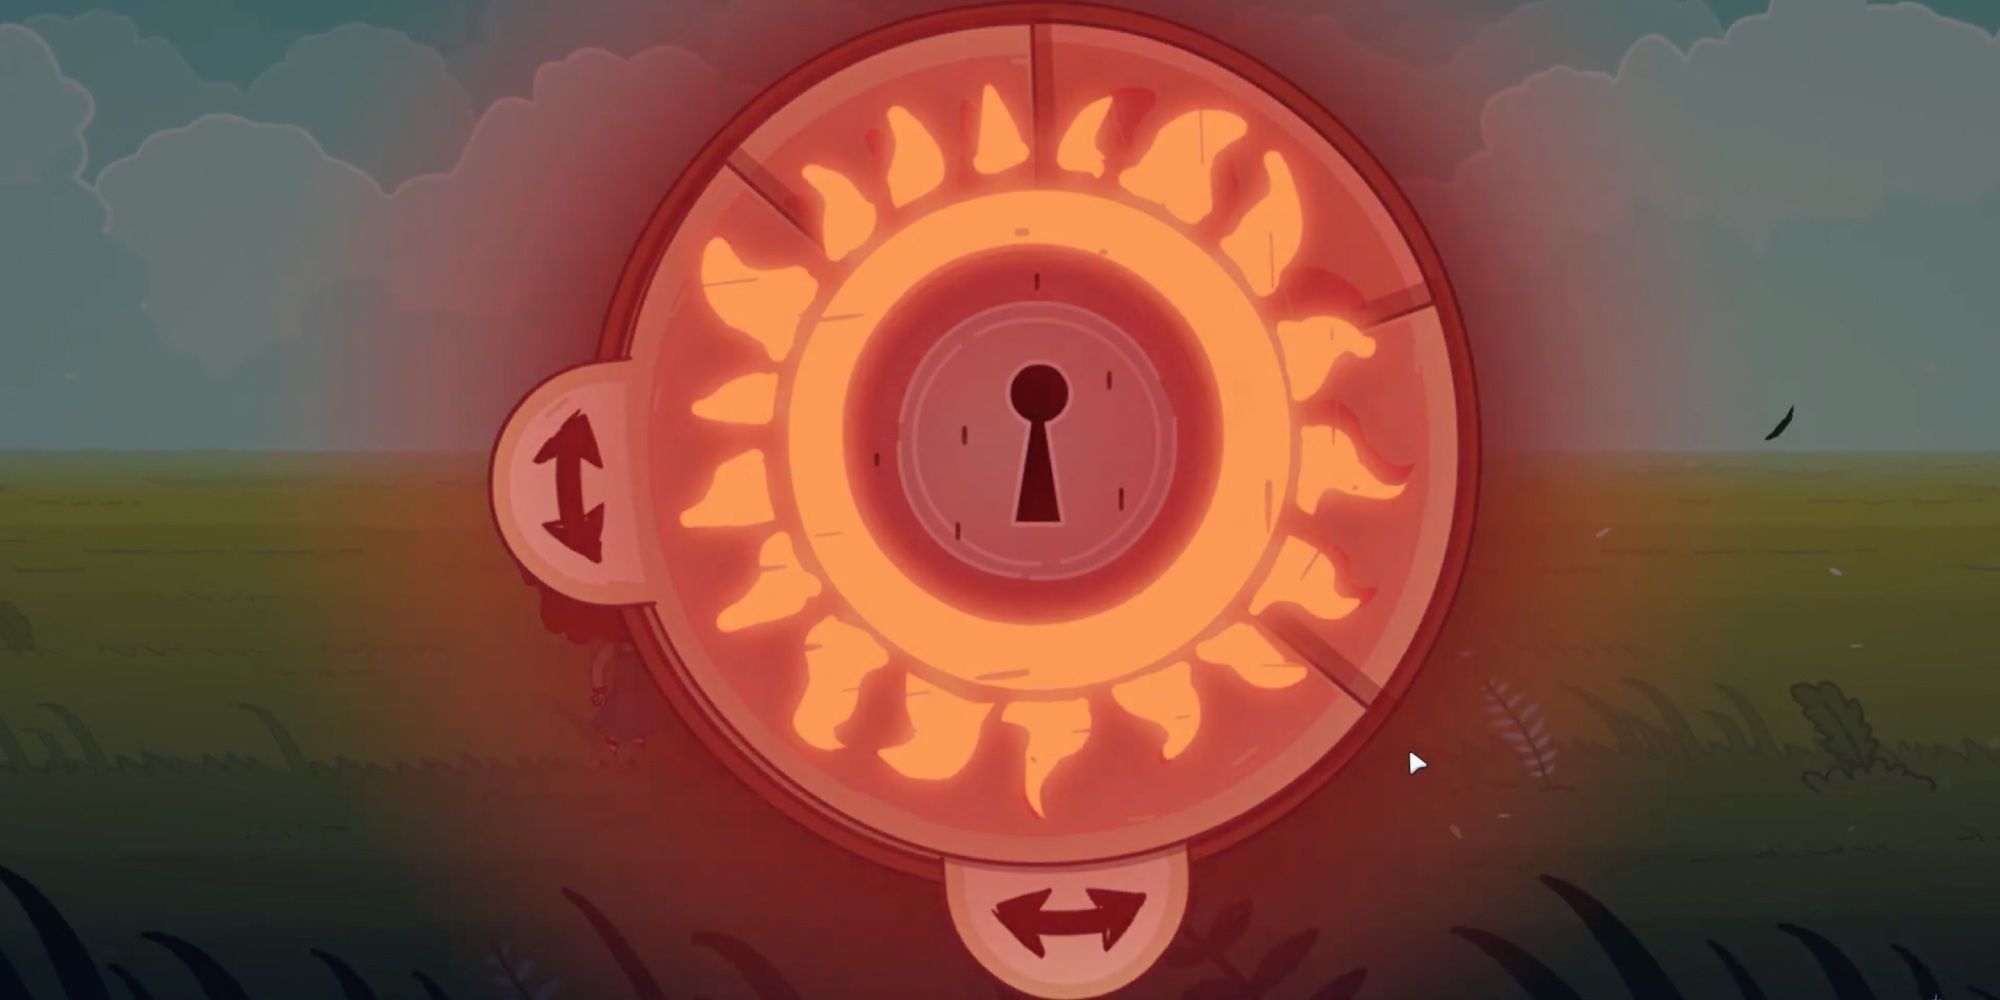 Player forms a full red Sun to unlock the door